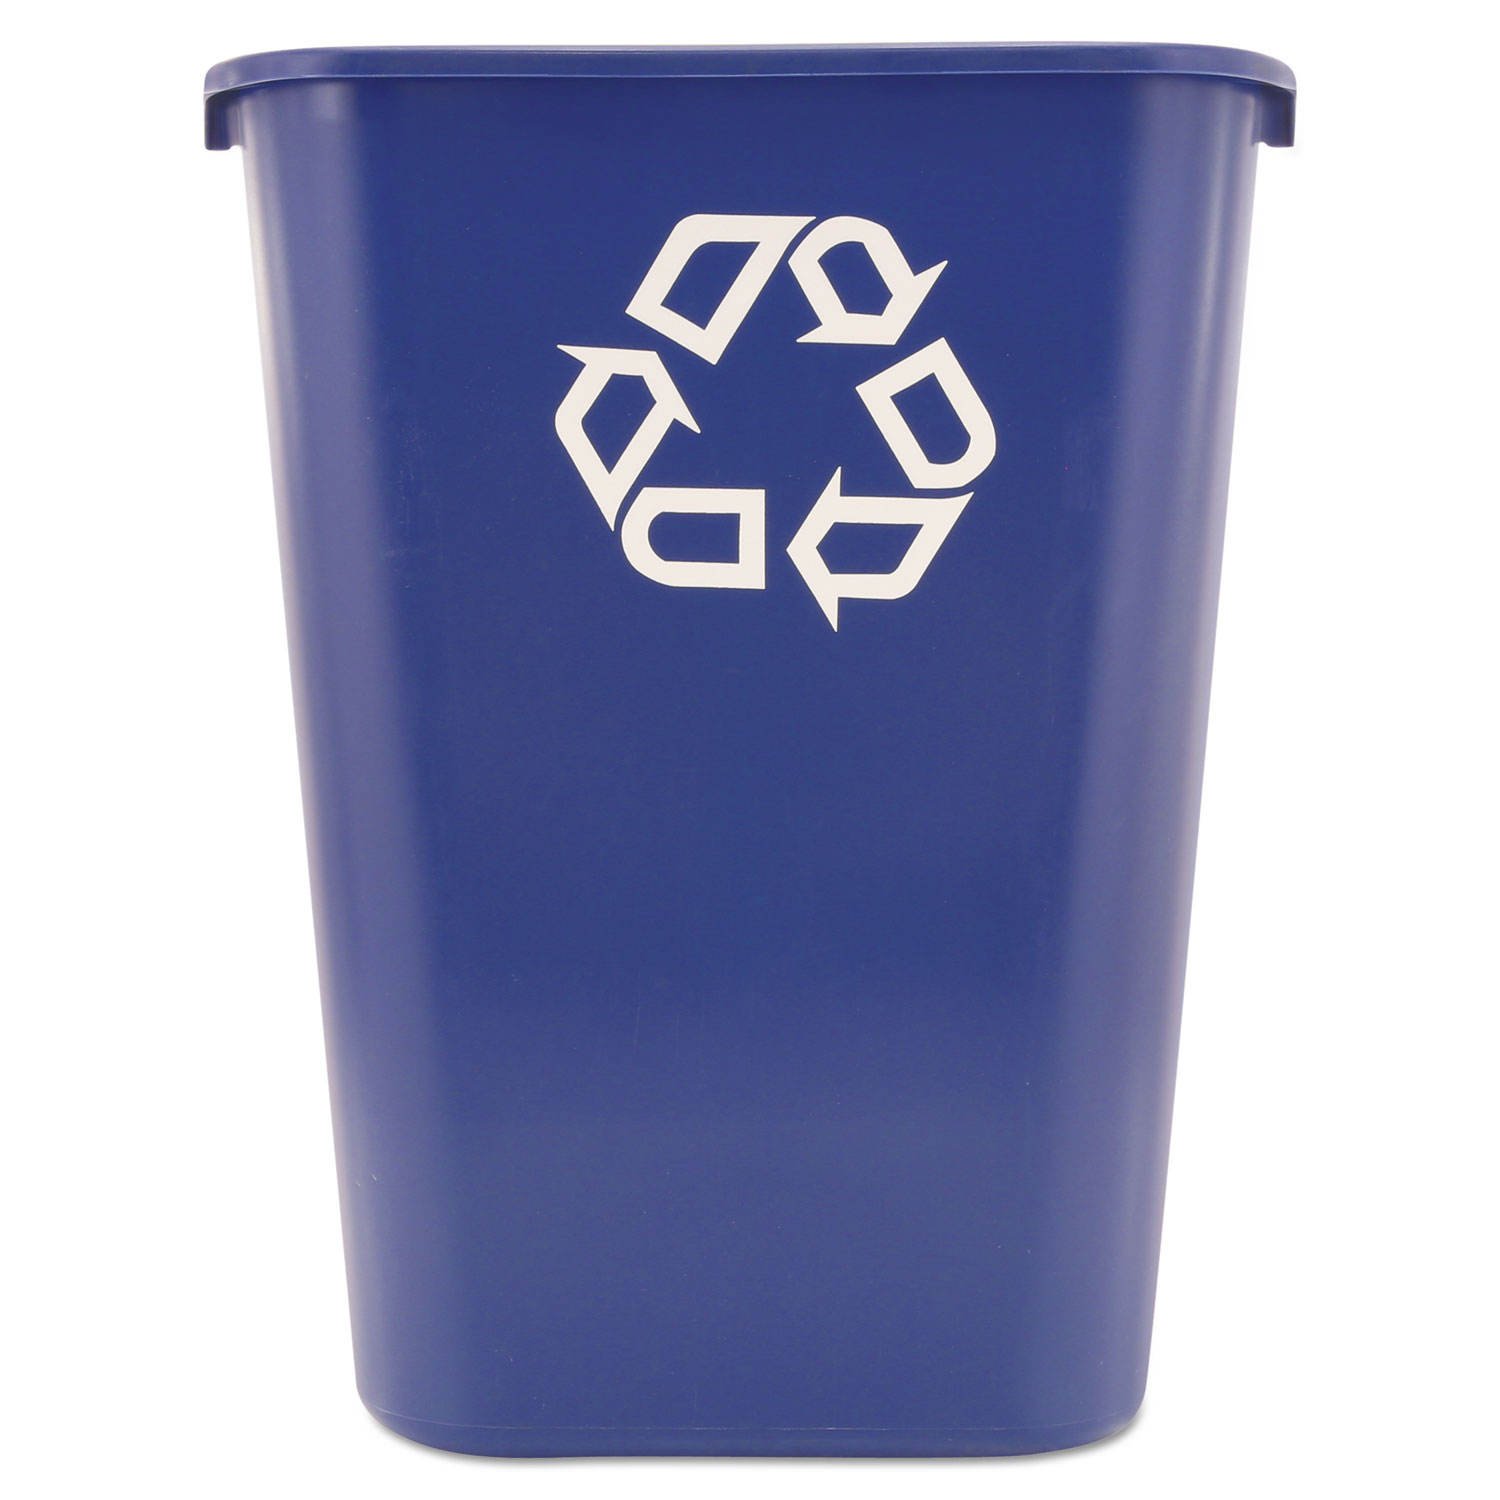  Rubbermaid Commercial FG295773BLUE Large Deskside Recycle Container with Symbol, Rectangular, Plastic, 41.25 qt, Blue (RCP295773BE) 